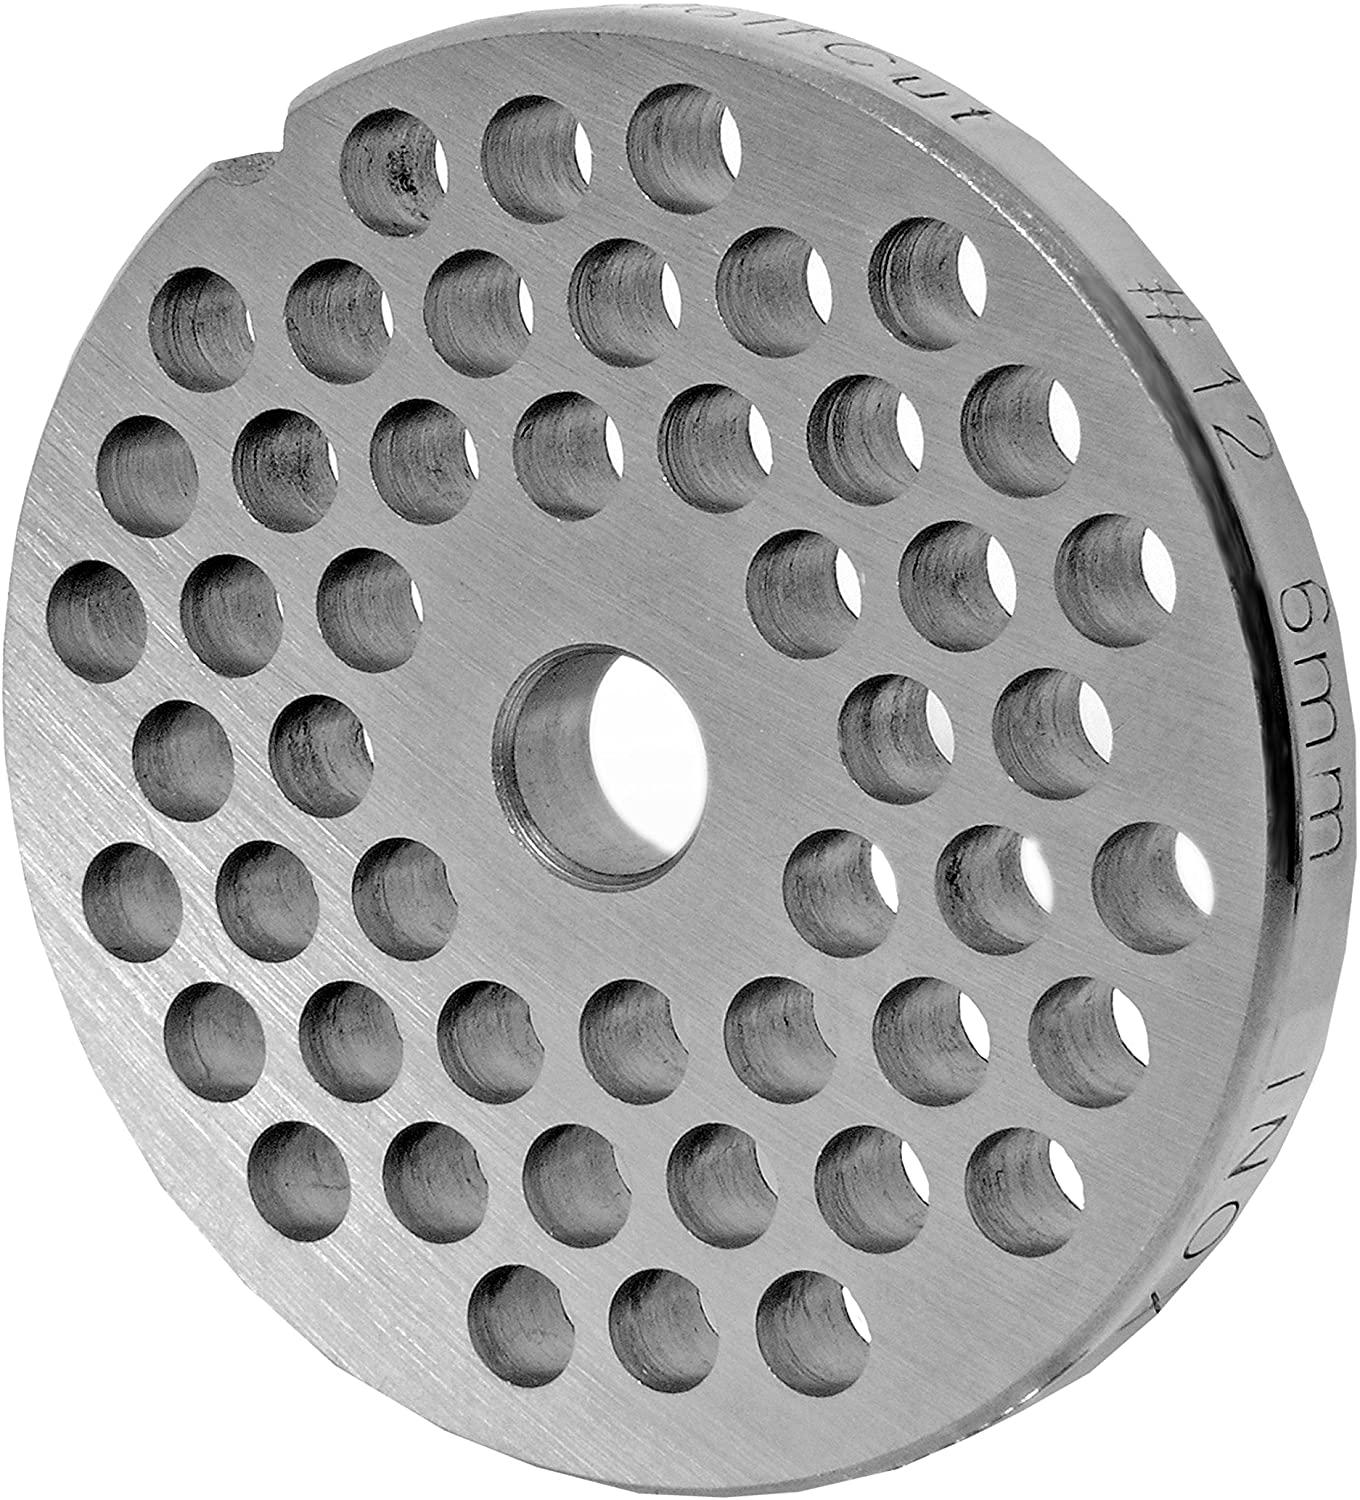 WolfCut Meat grinder discs suitable for Reber sizes 12 (6.0 mm)